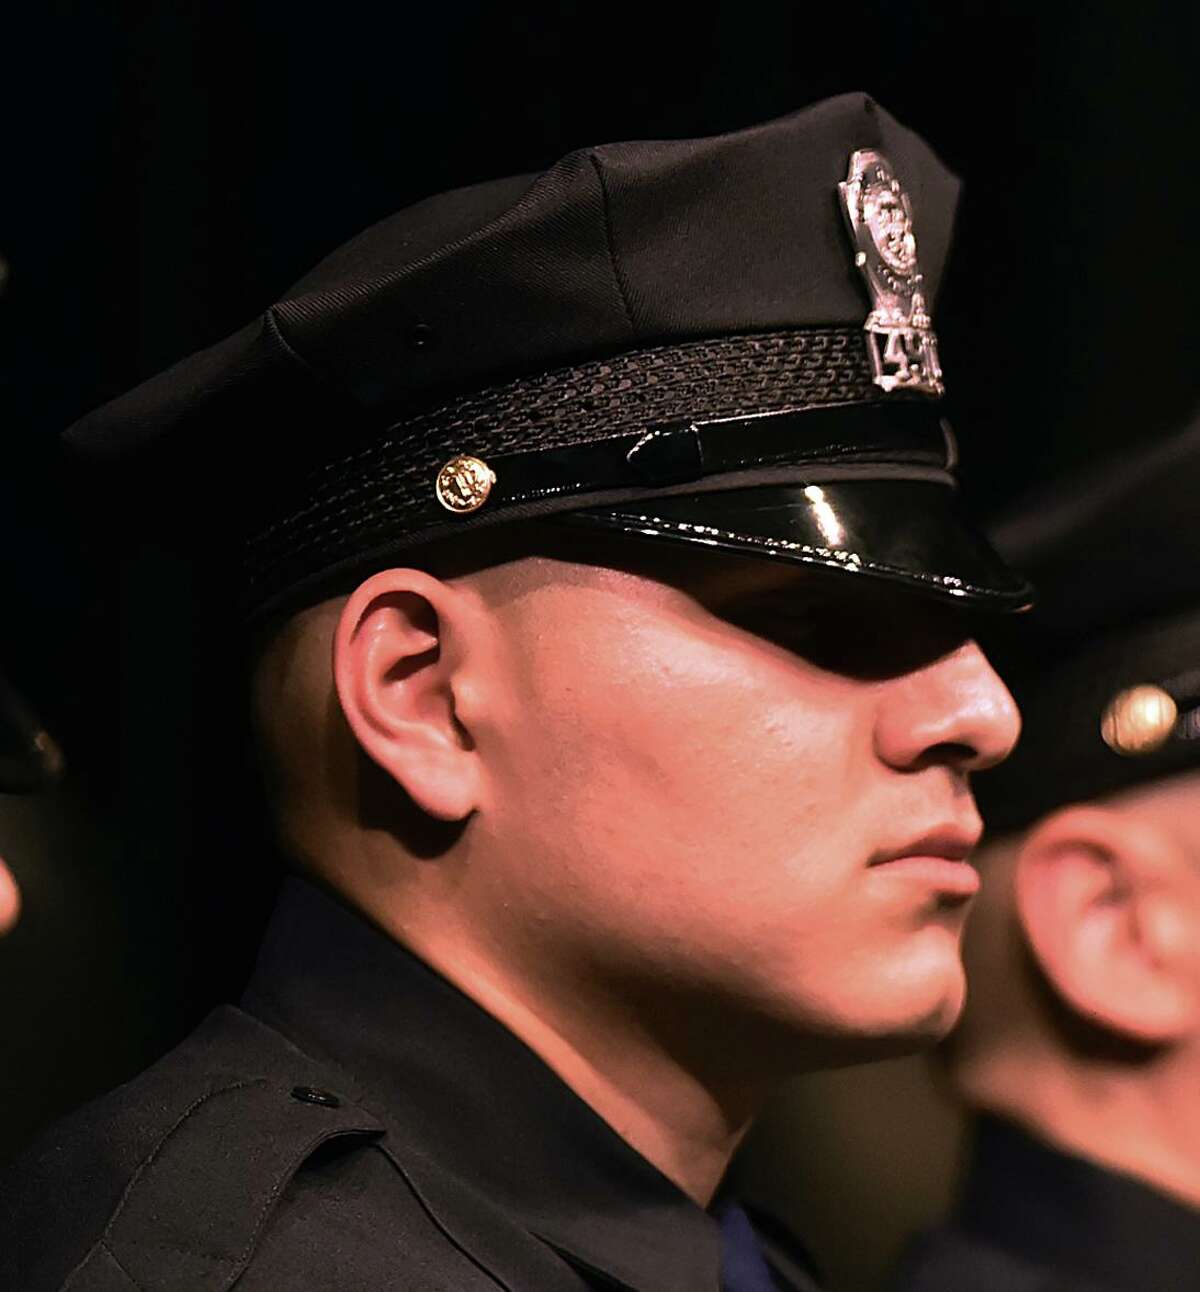 Officer Gary E. Gamarra during a 2017 ceremony for his class of officers at the New Haven Police Academy. Gamarra was stripped of his police certification earlier this month after allegedly coercing two women into sexual relationships.